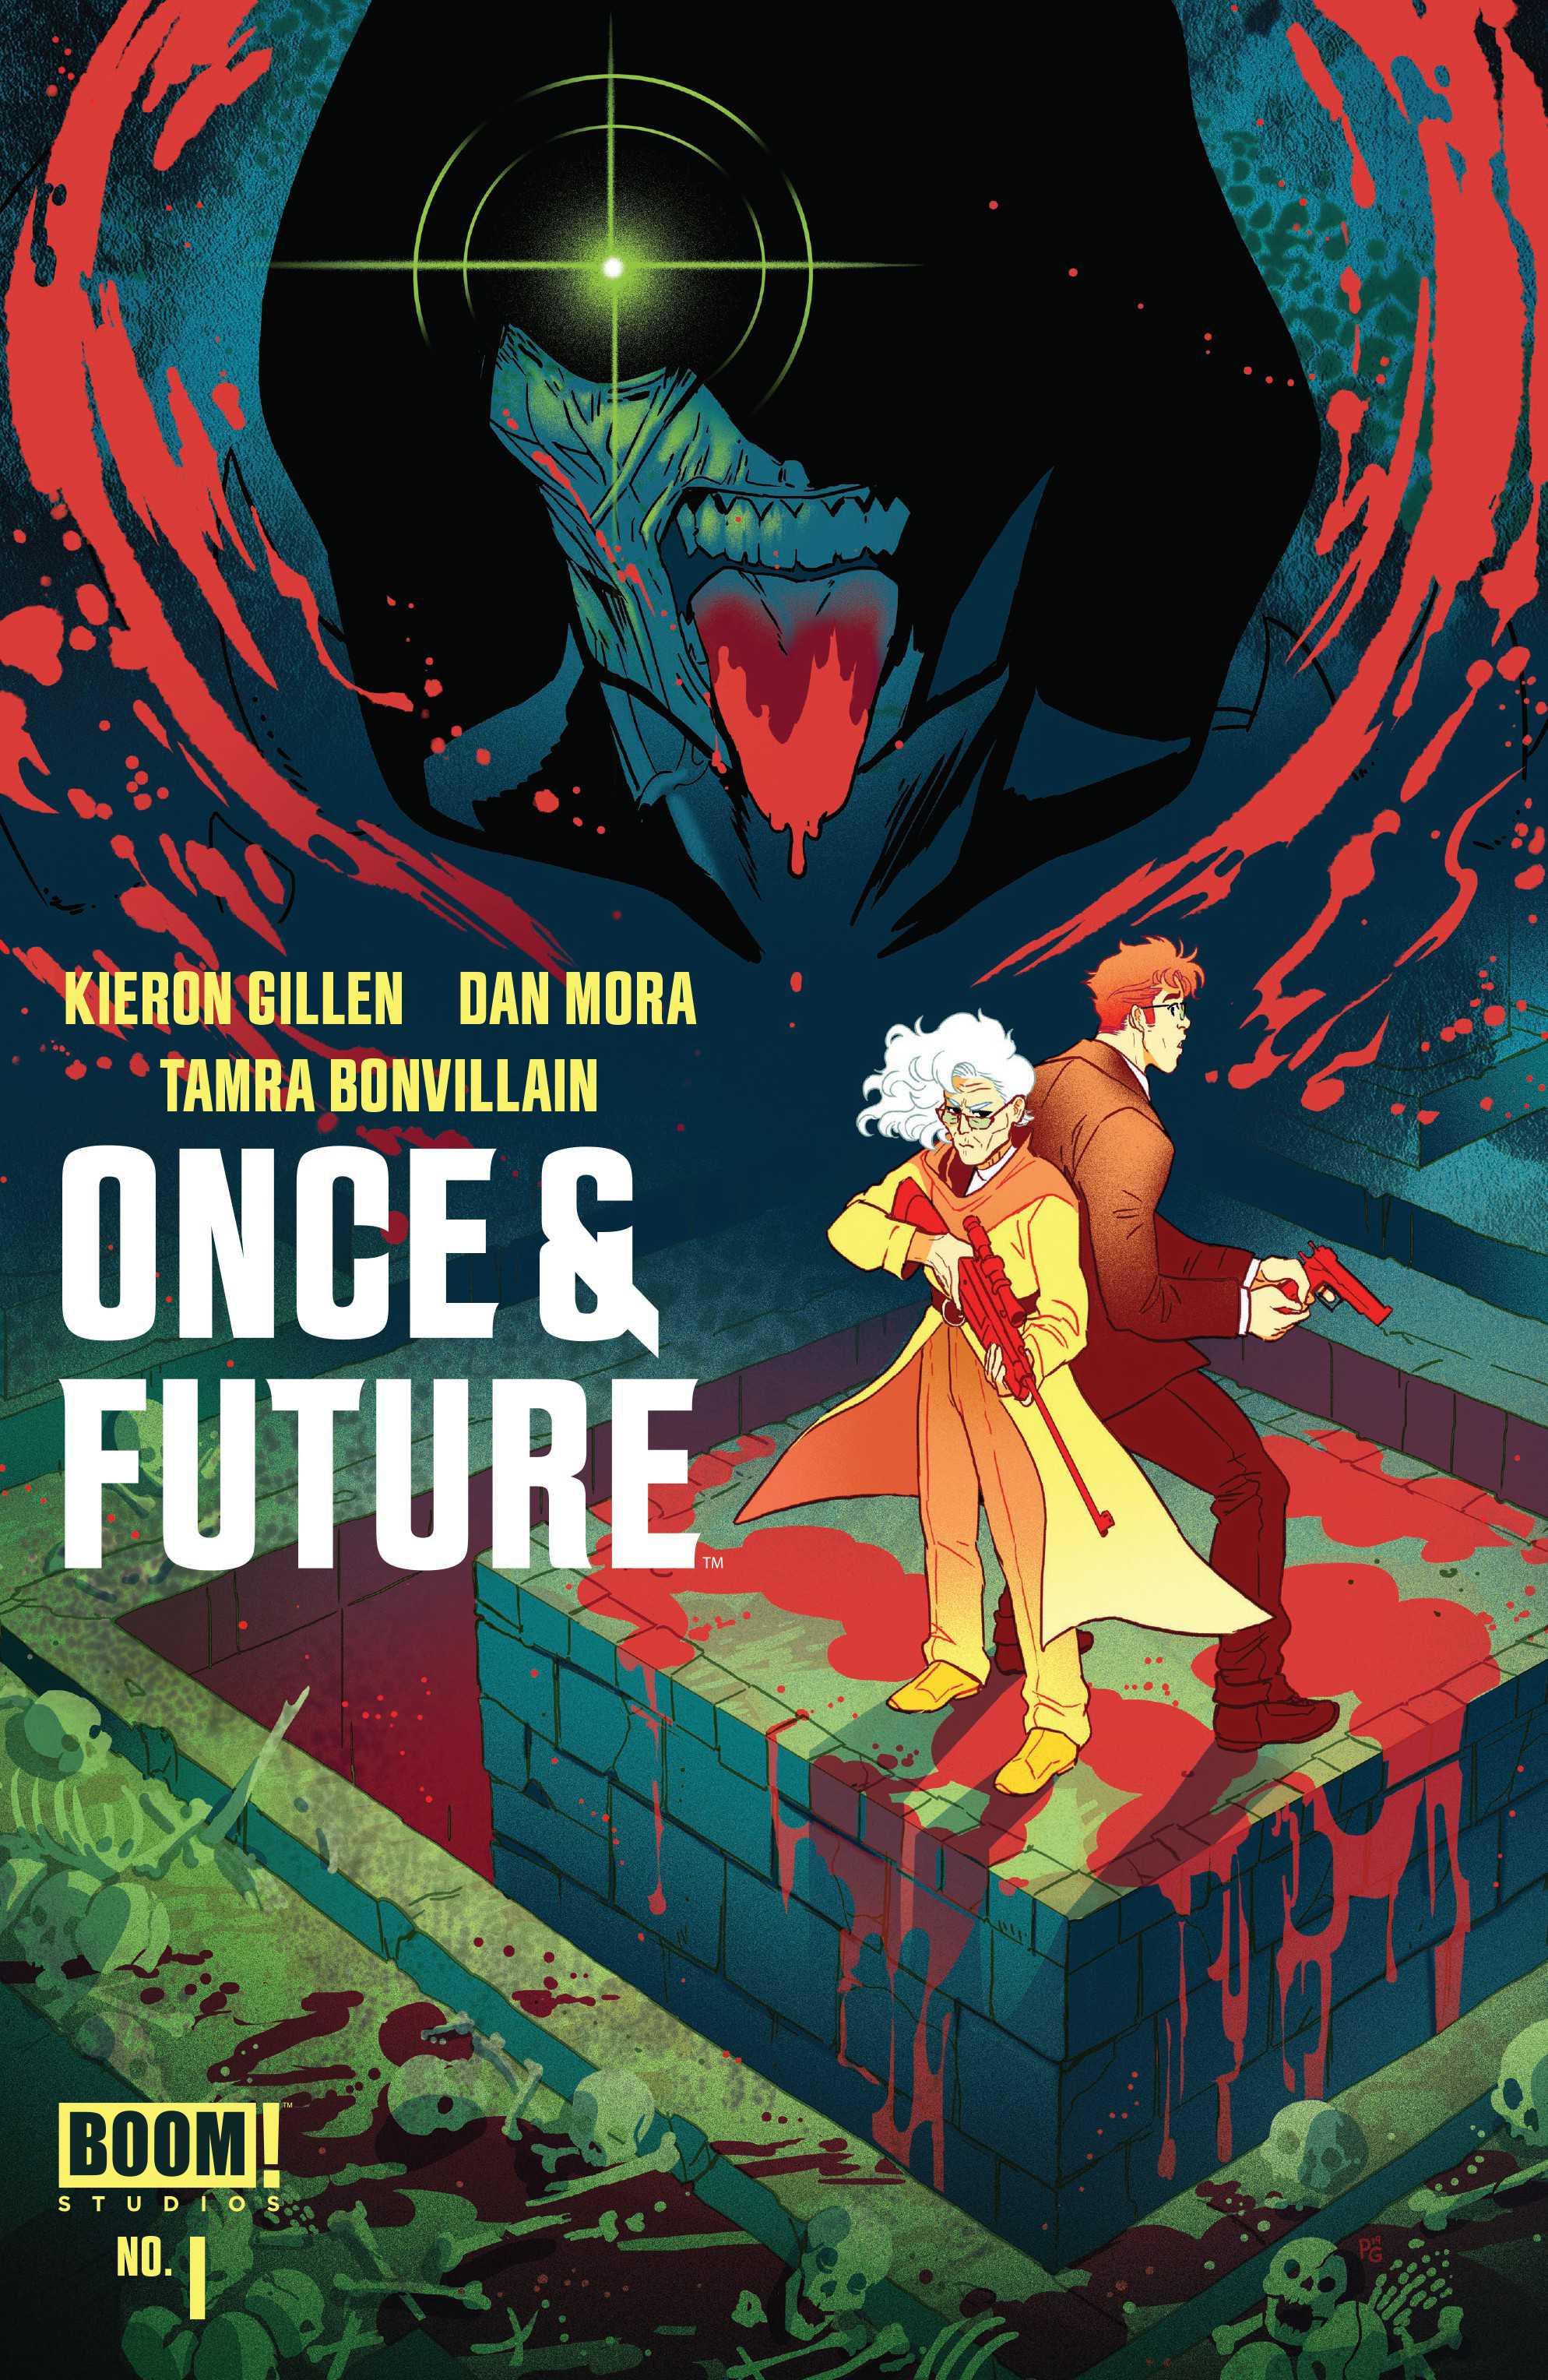 Once & Future #1 Comichub Variant (Of 6)